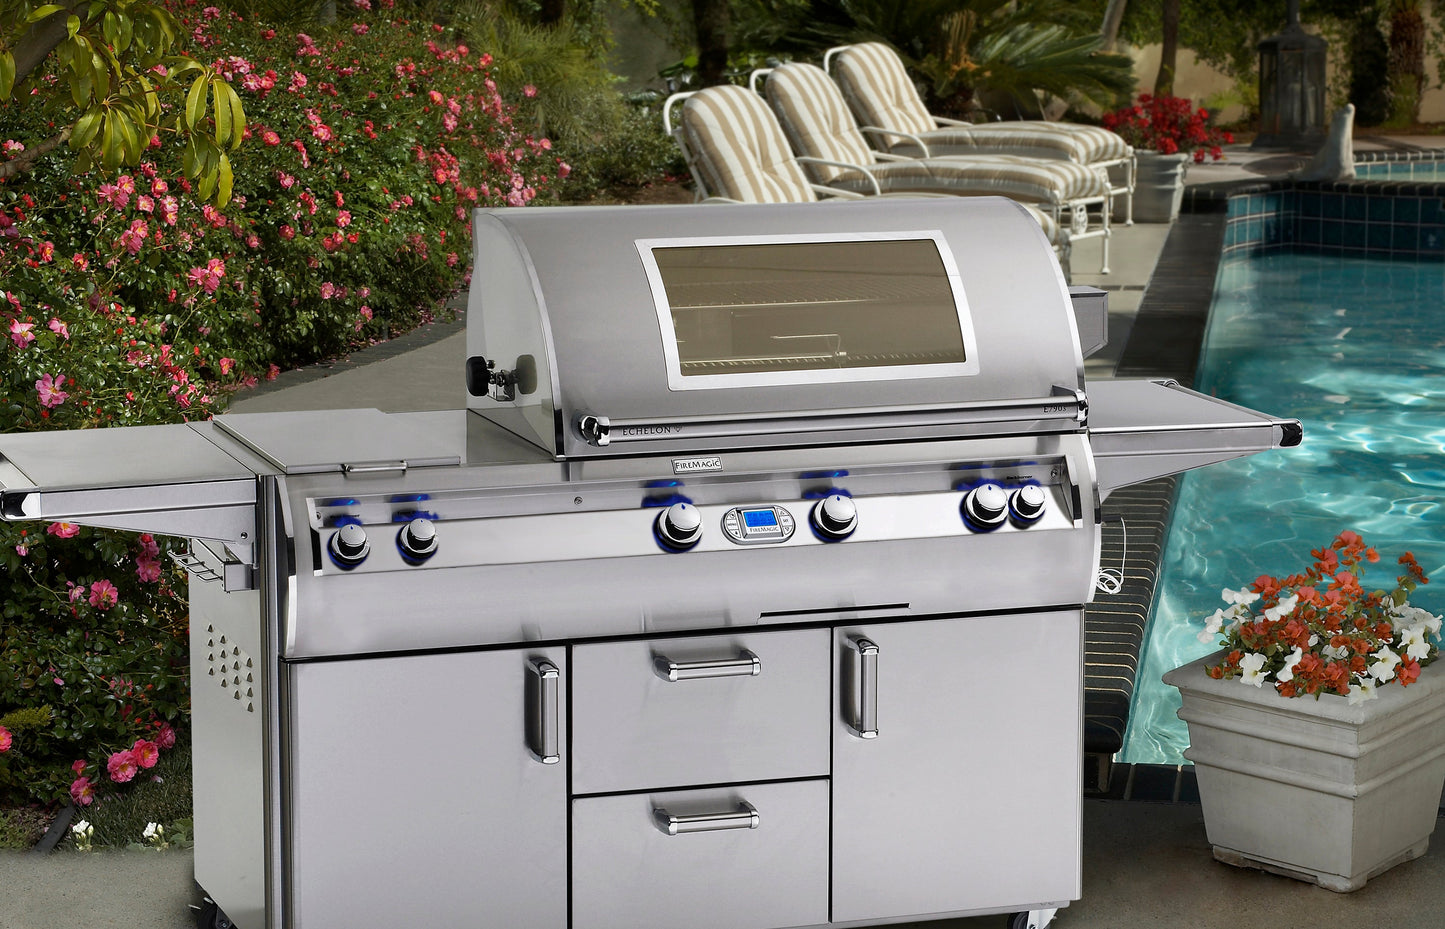 Firemagic 36 Inch Echelon Series Portable Grill with Analog Thermometer and Double Side Burner | E790s-8EAN-71 | 